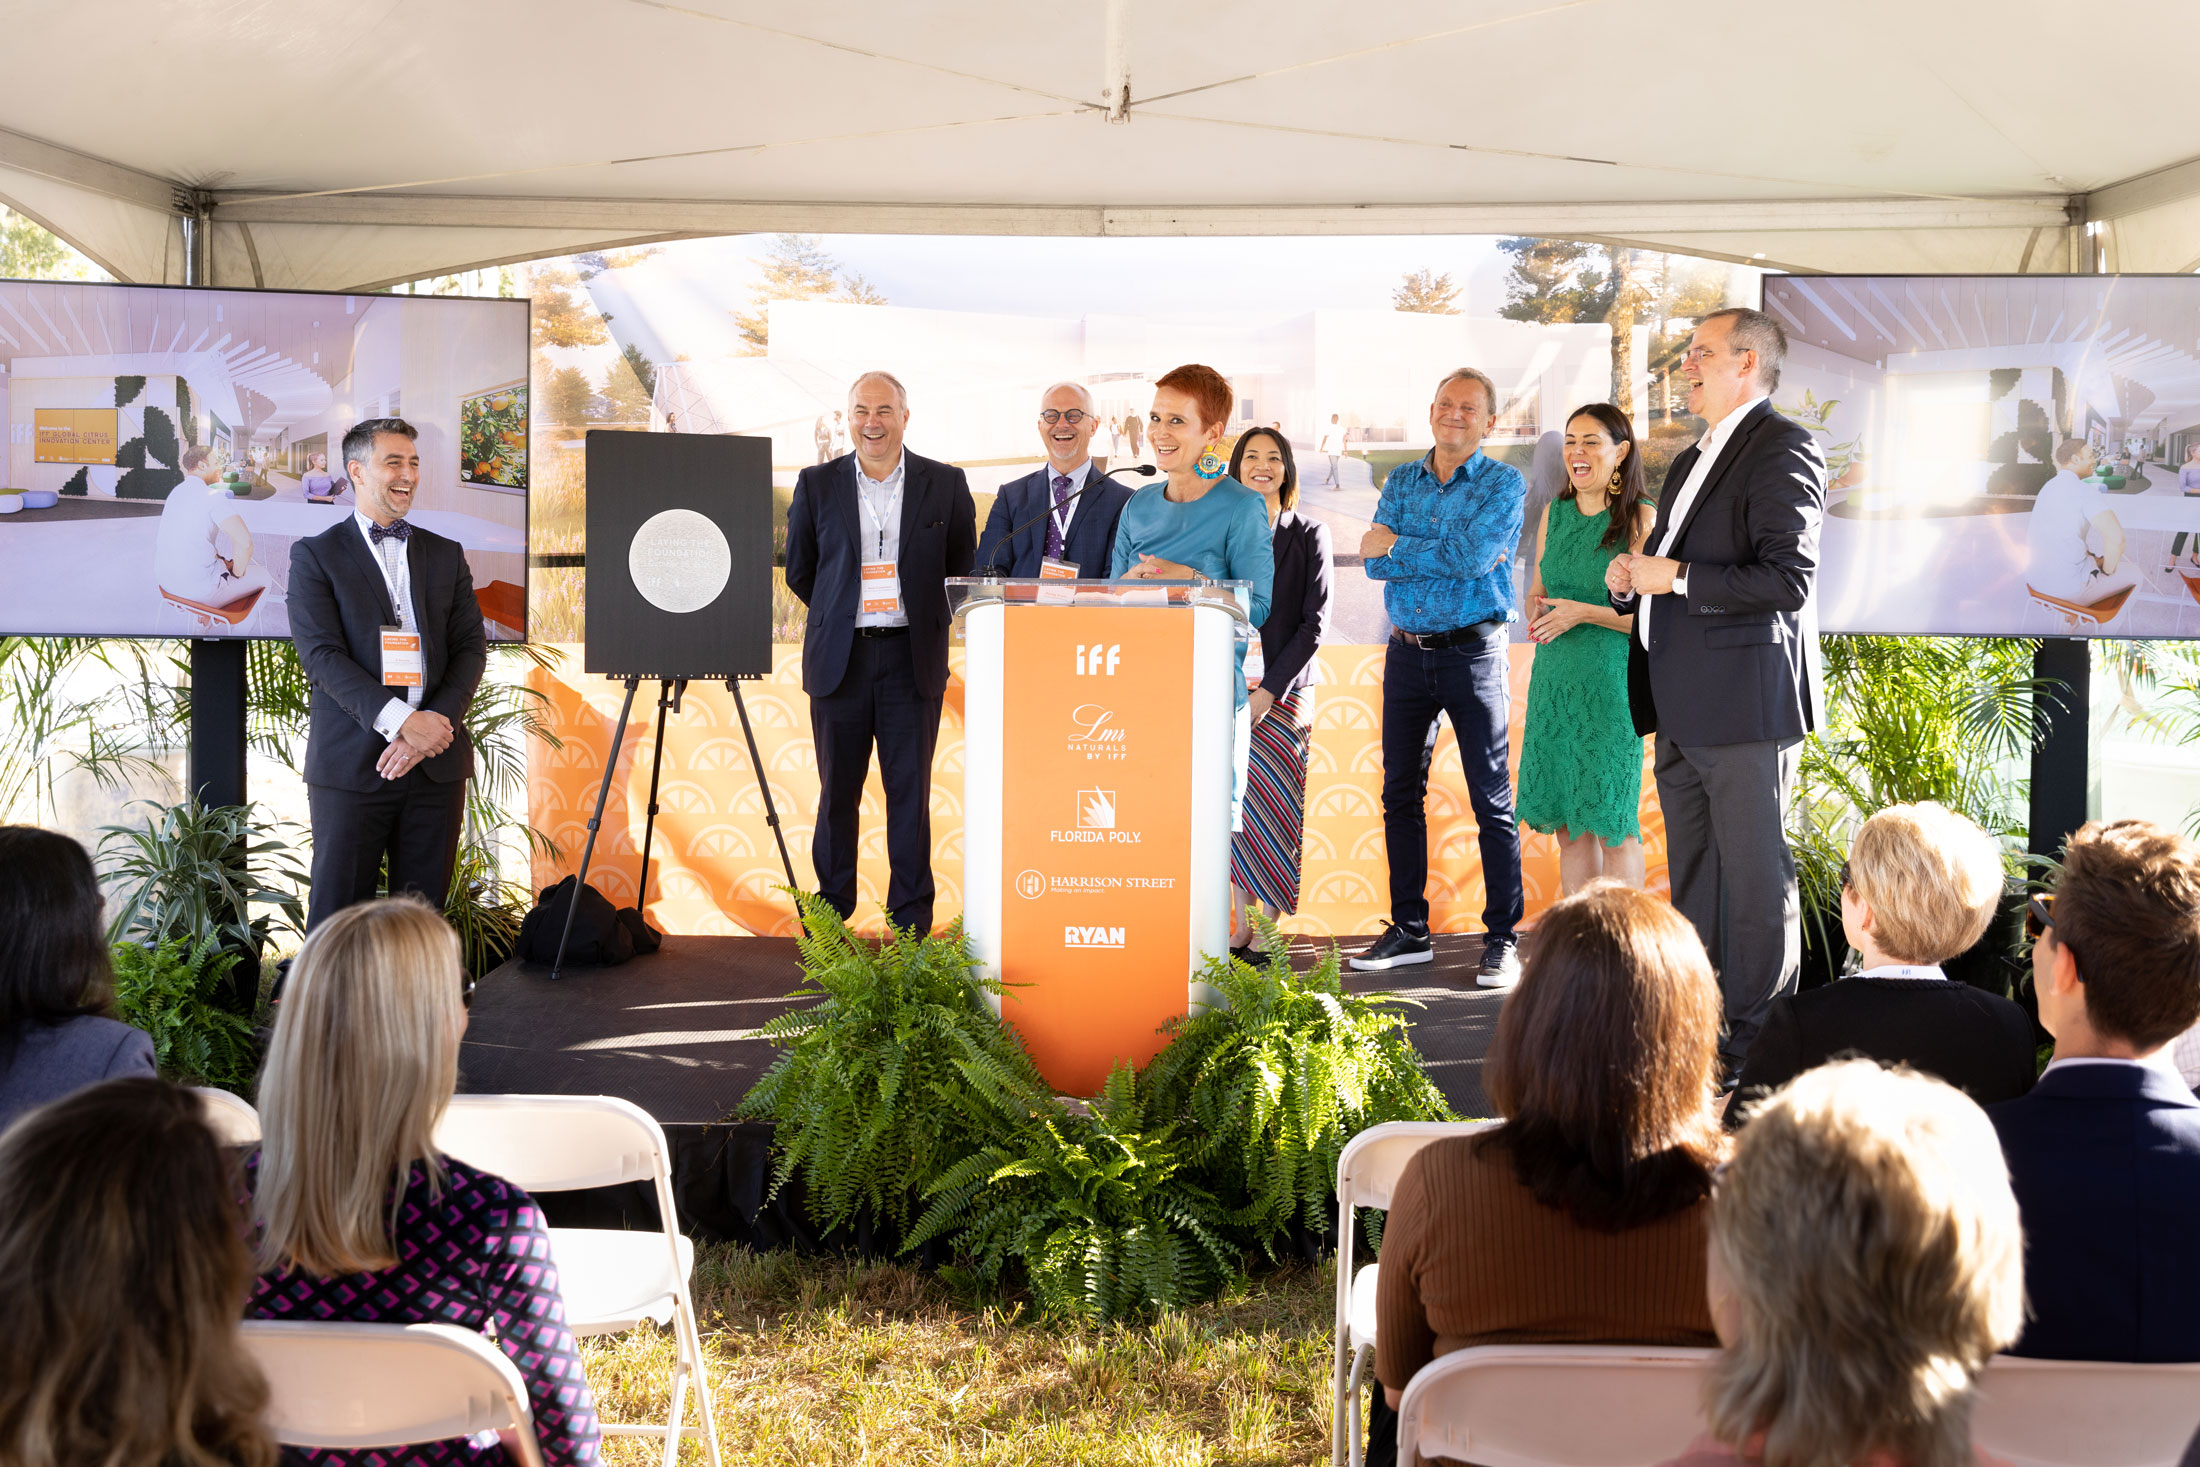 Leaders from IFF and Florida Polytechnic University launch the Citrus Innovation Center in ceremony.